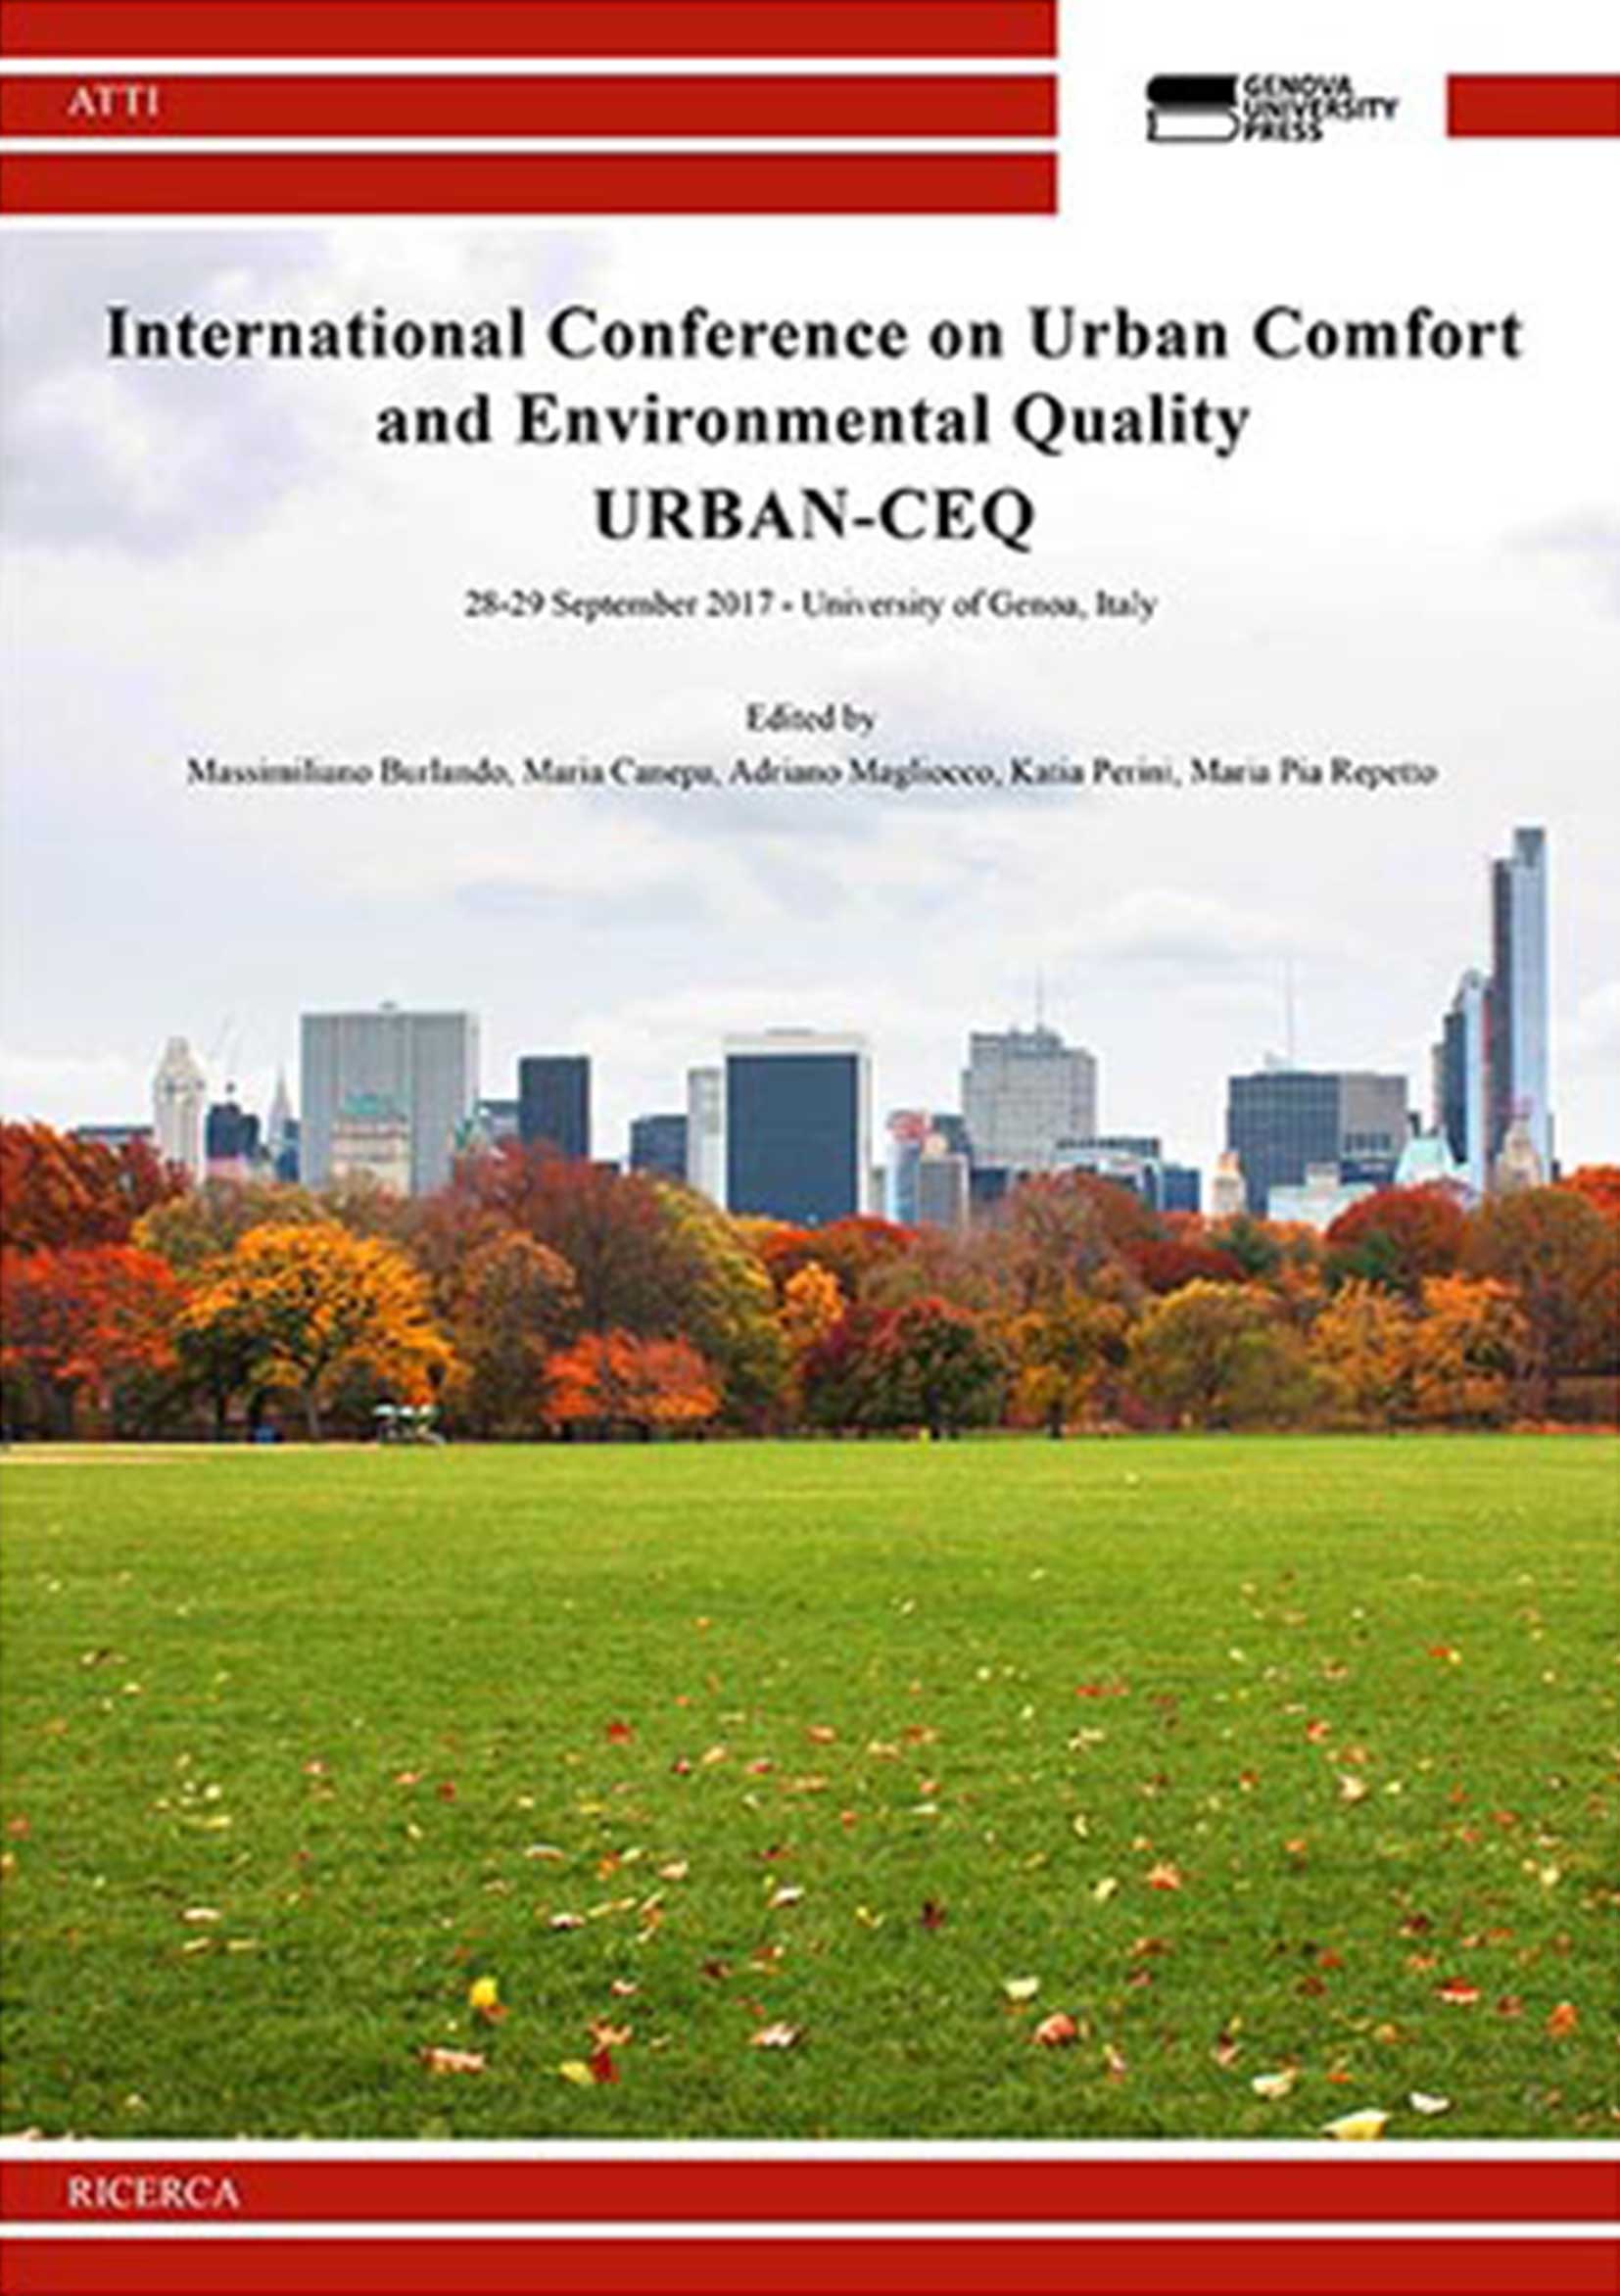 International Conference on Urban Comfort and Environmental Quality - URBAN-CEQ